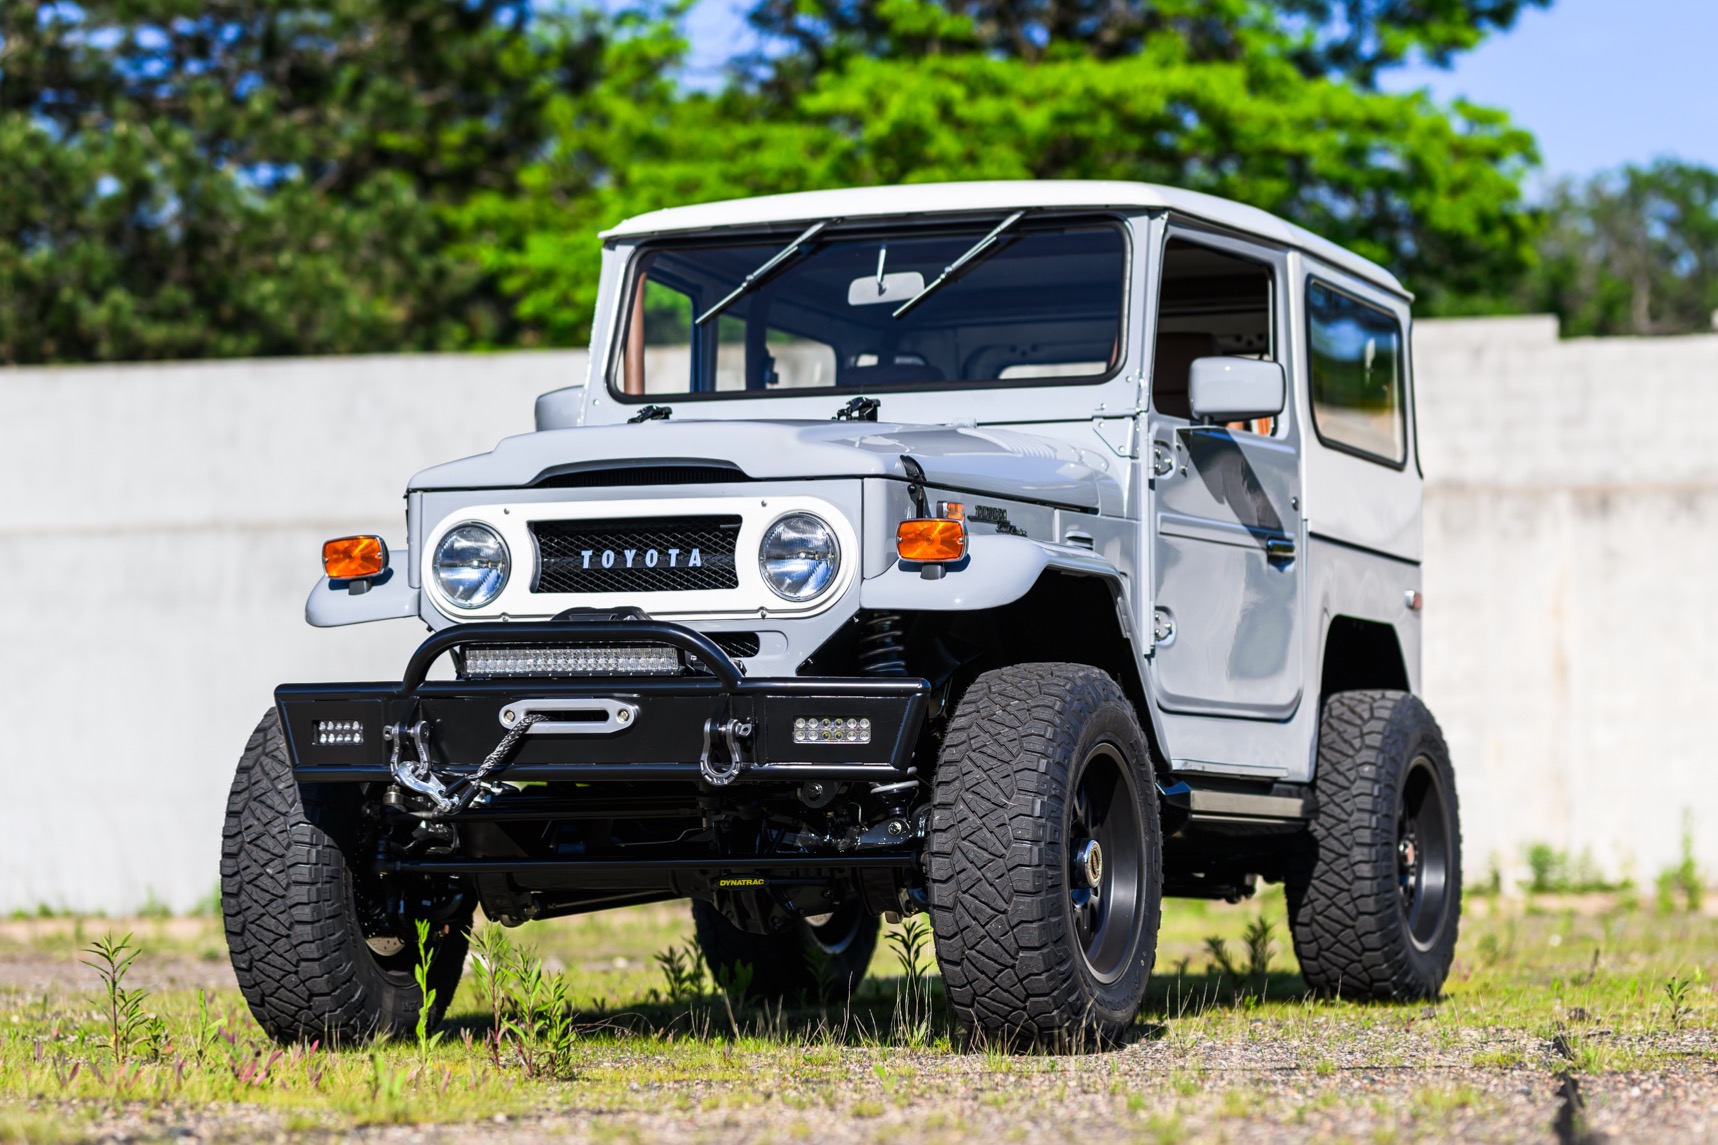 Used LS3-Powered 1972 Toyota Land Cruiser FJ40 Review